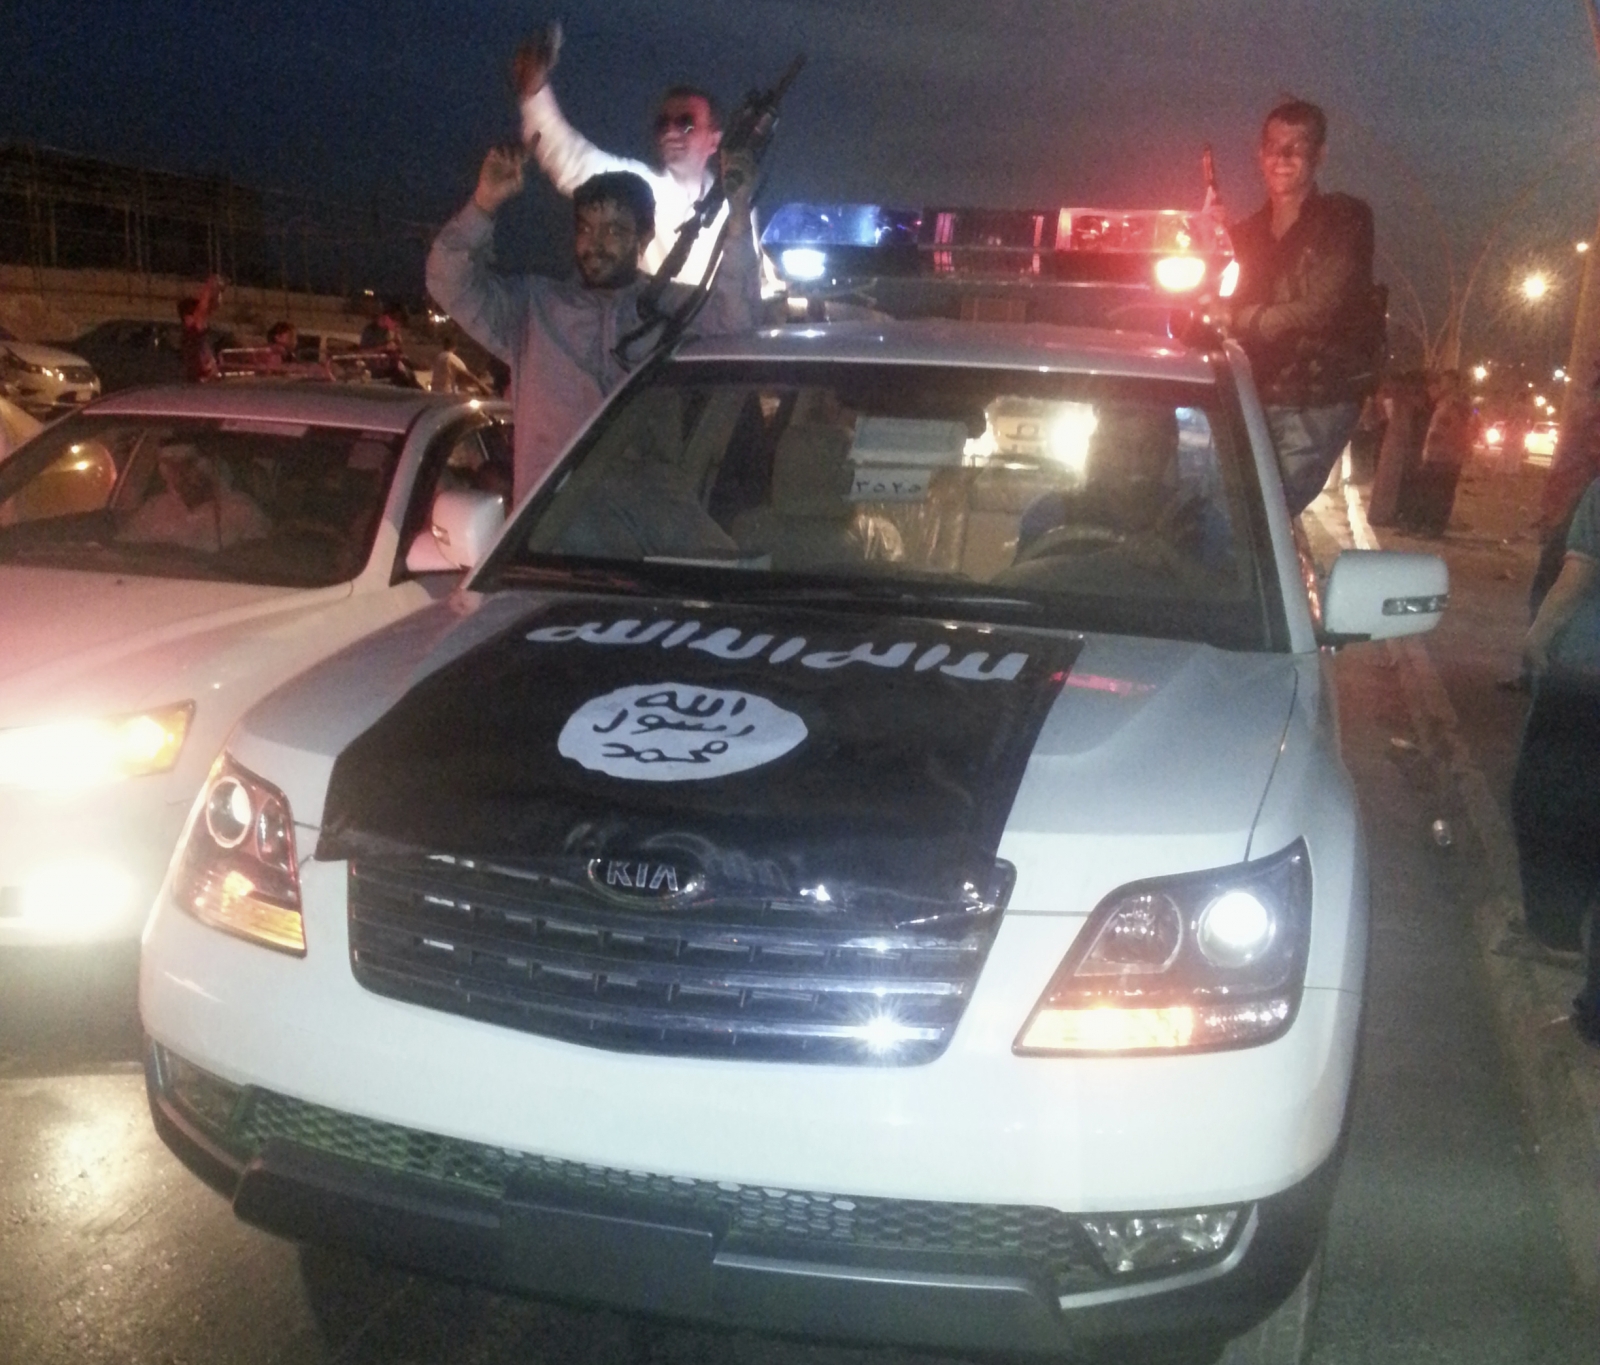 Isis fighters in a commandeered police vehicle in Mosul, Iraq. (Getty)